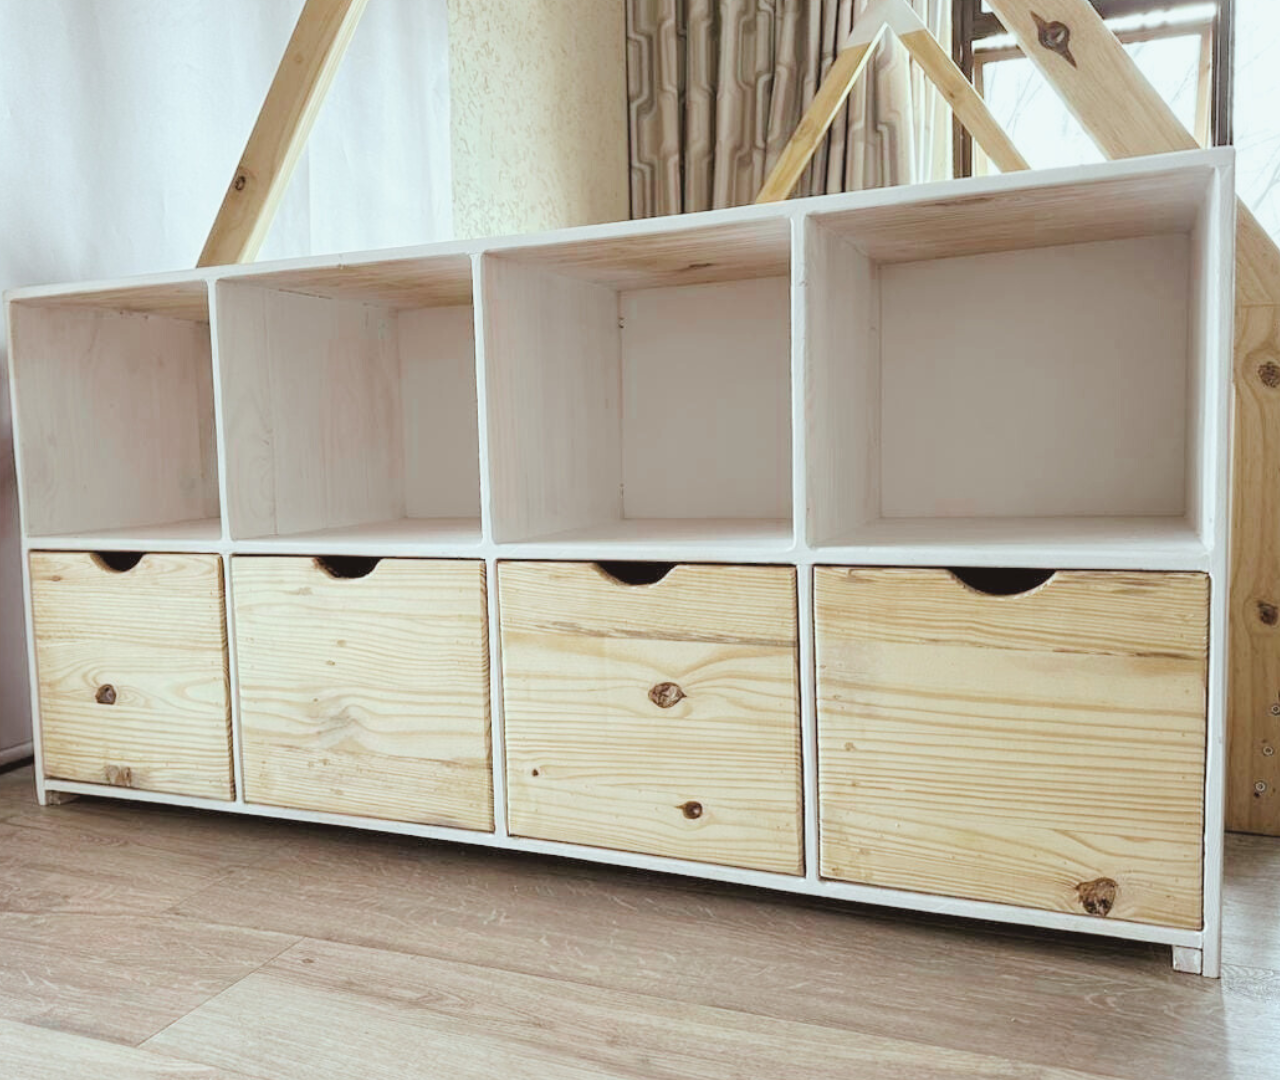 Wooden Cubby Storage Set White and raw pine